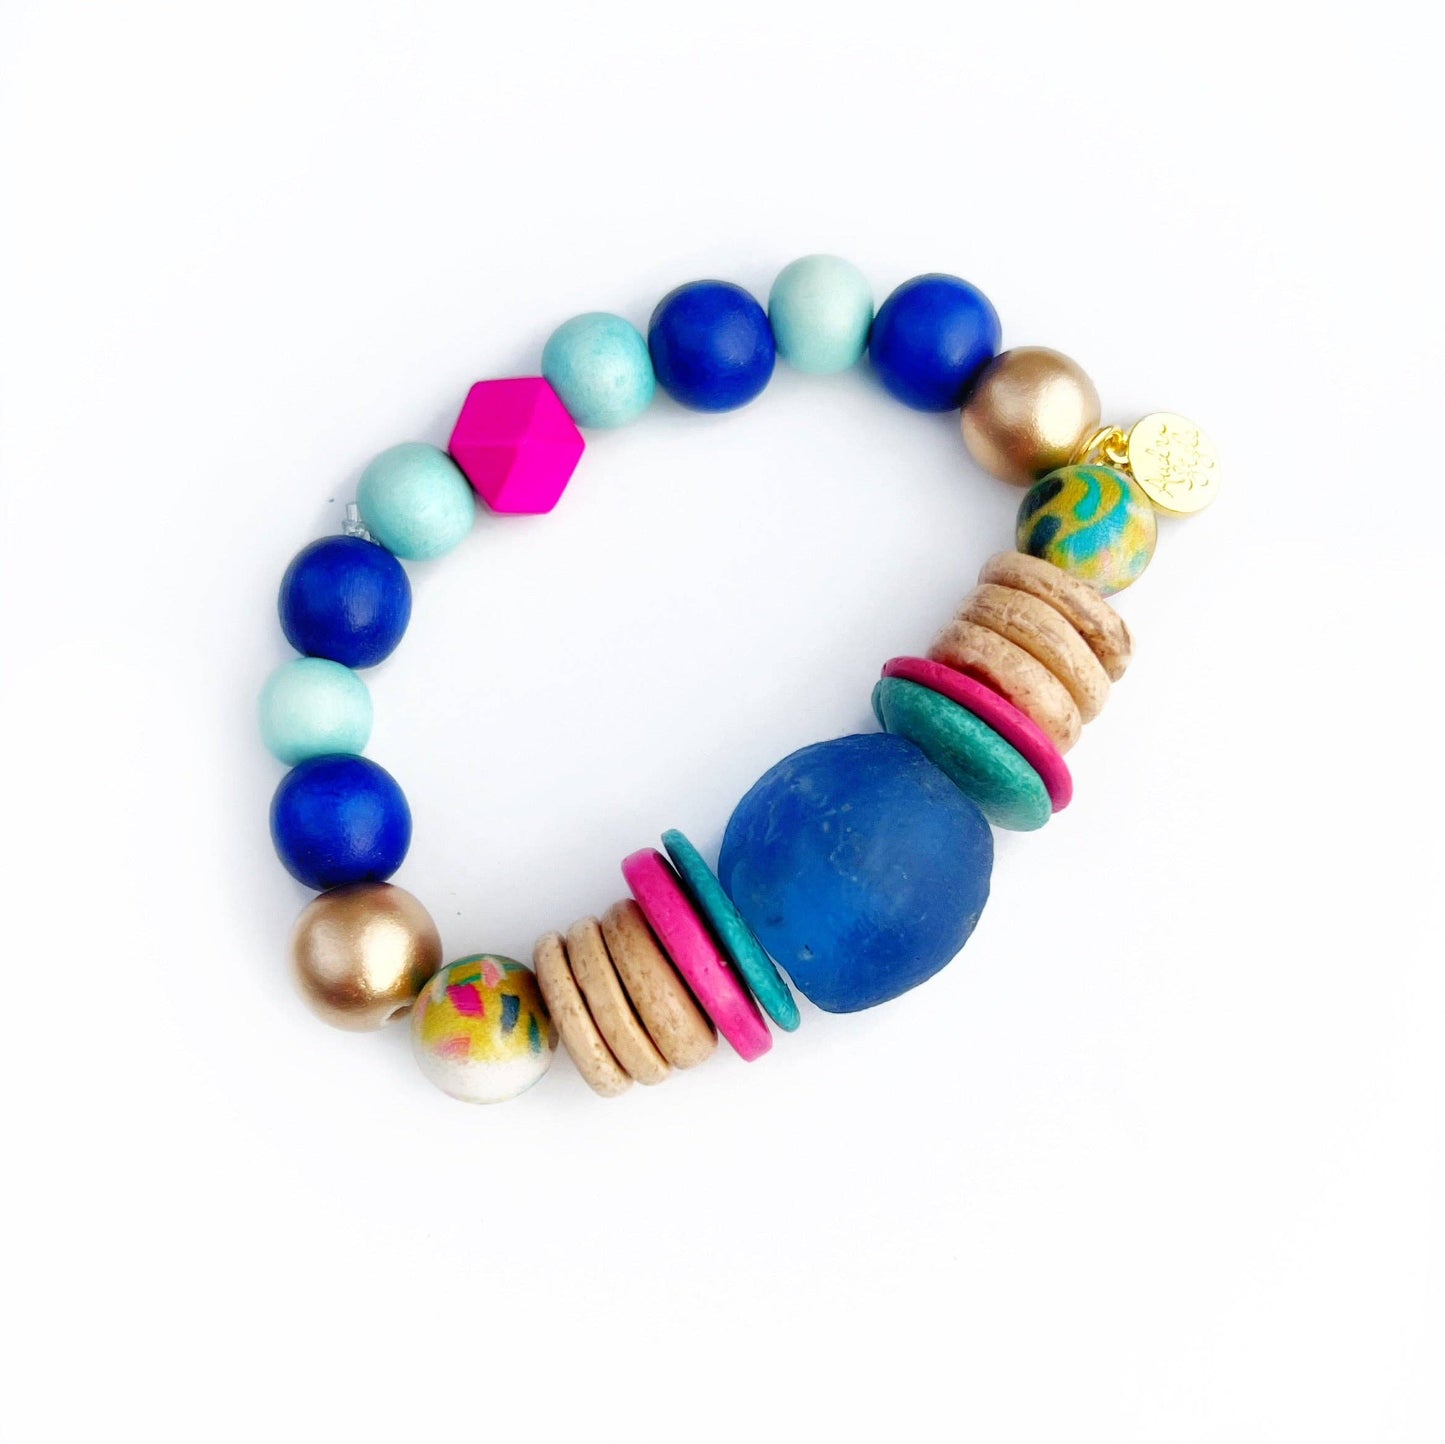 Audra Style - Limited Edition Stacking Bracelet - Blue Glass Focal